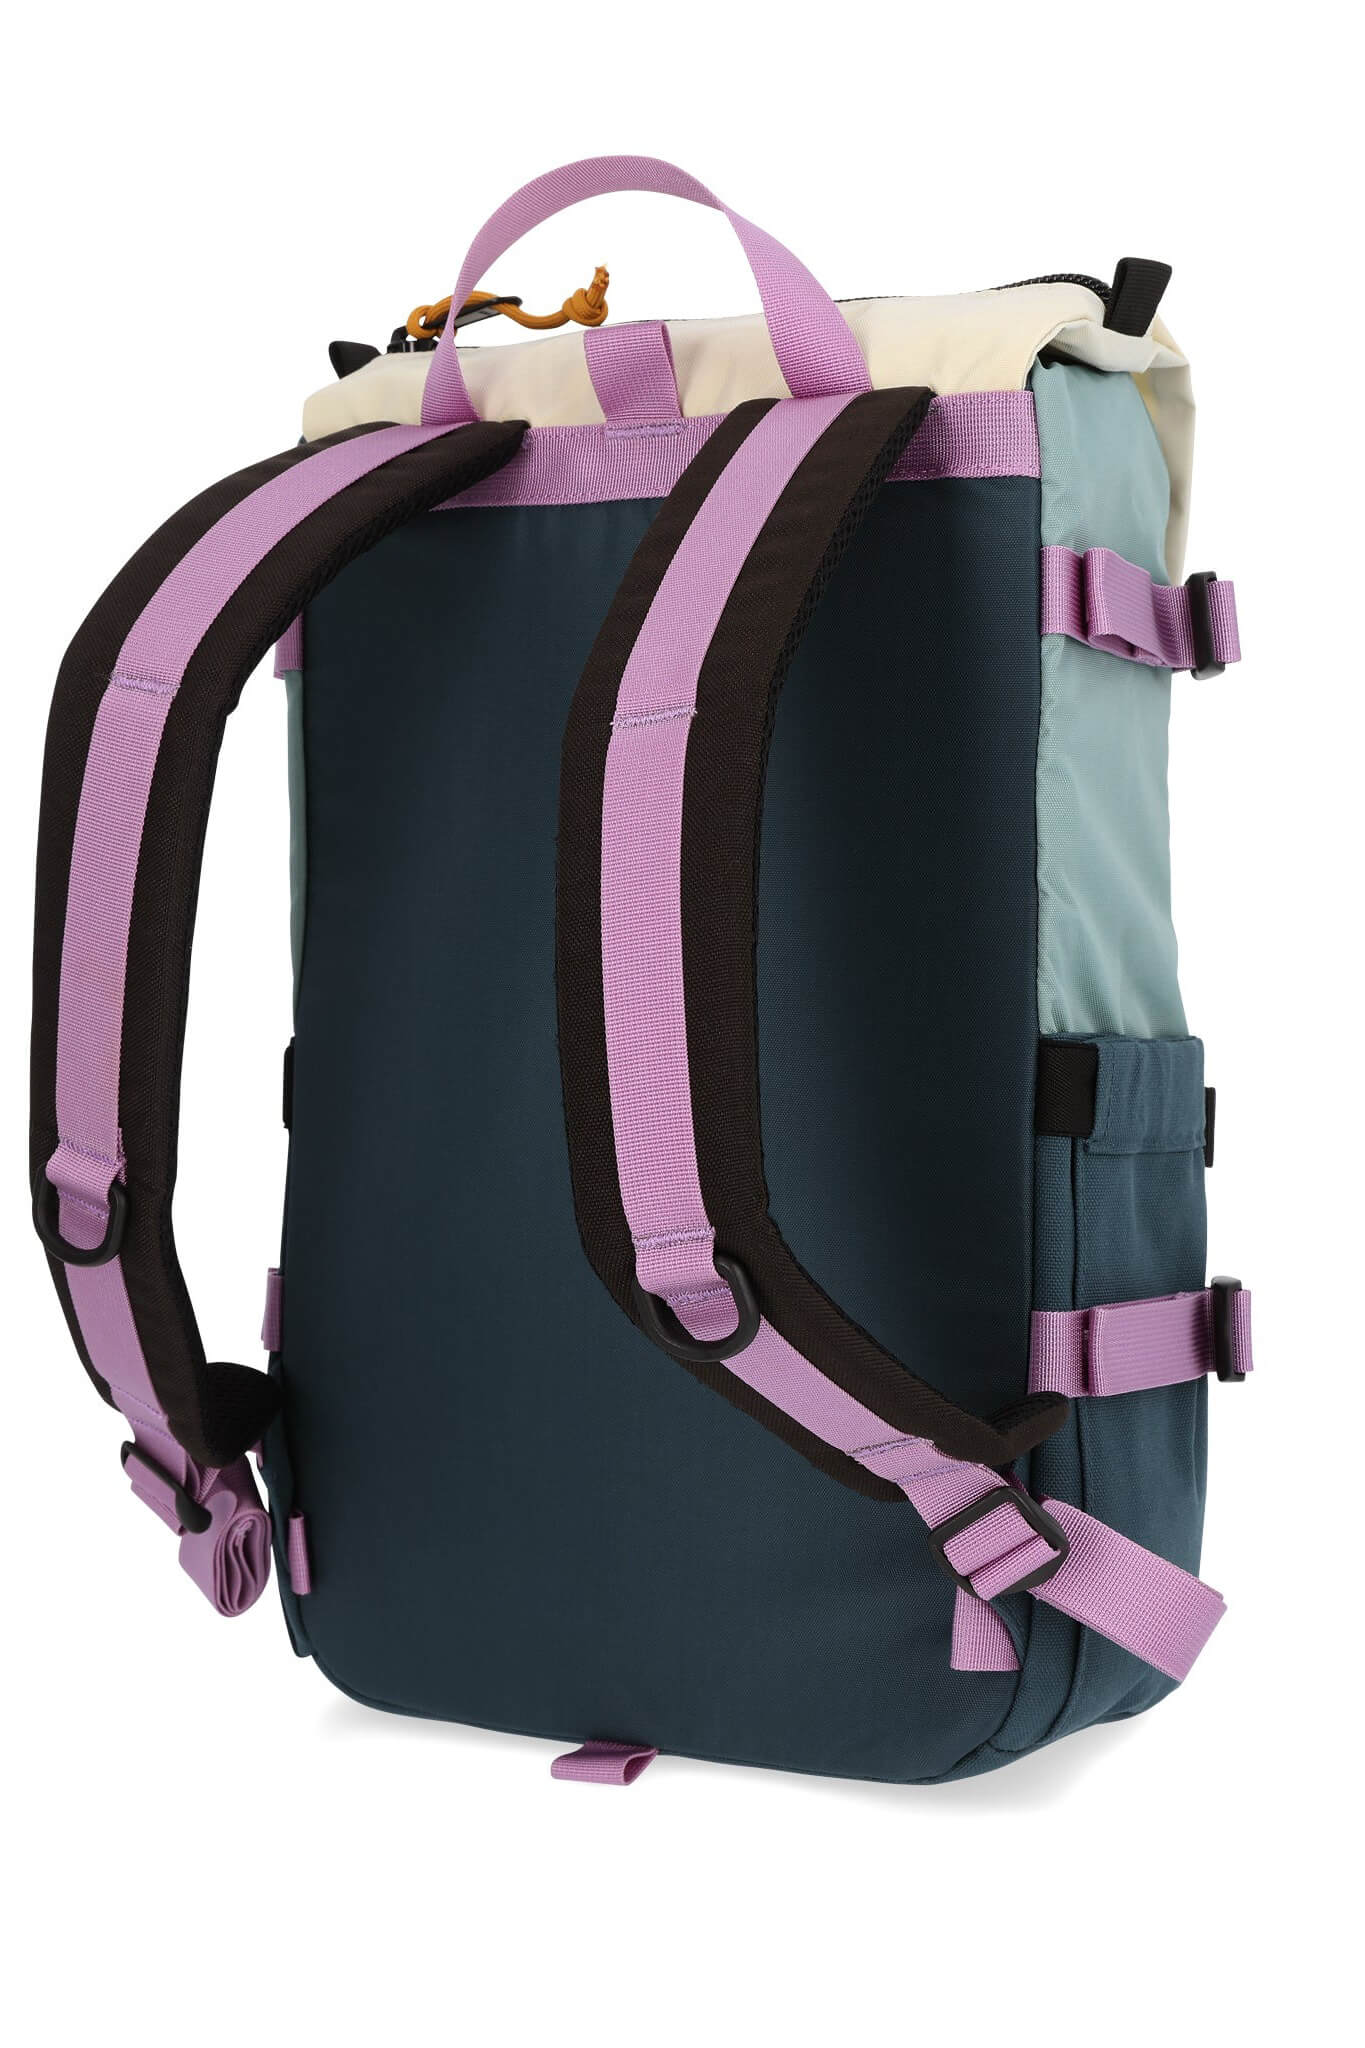 Topo Designs rover pack classic in sage and pond blue